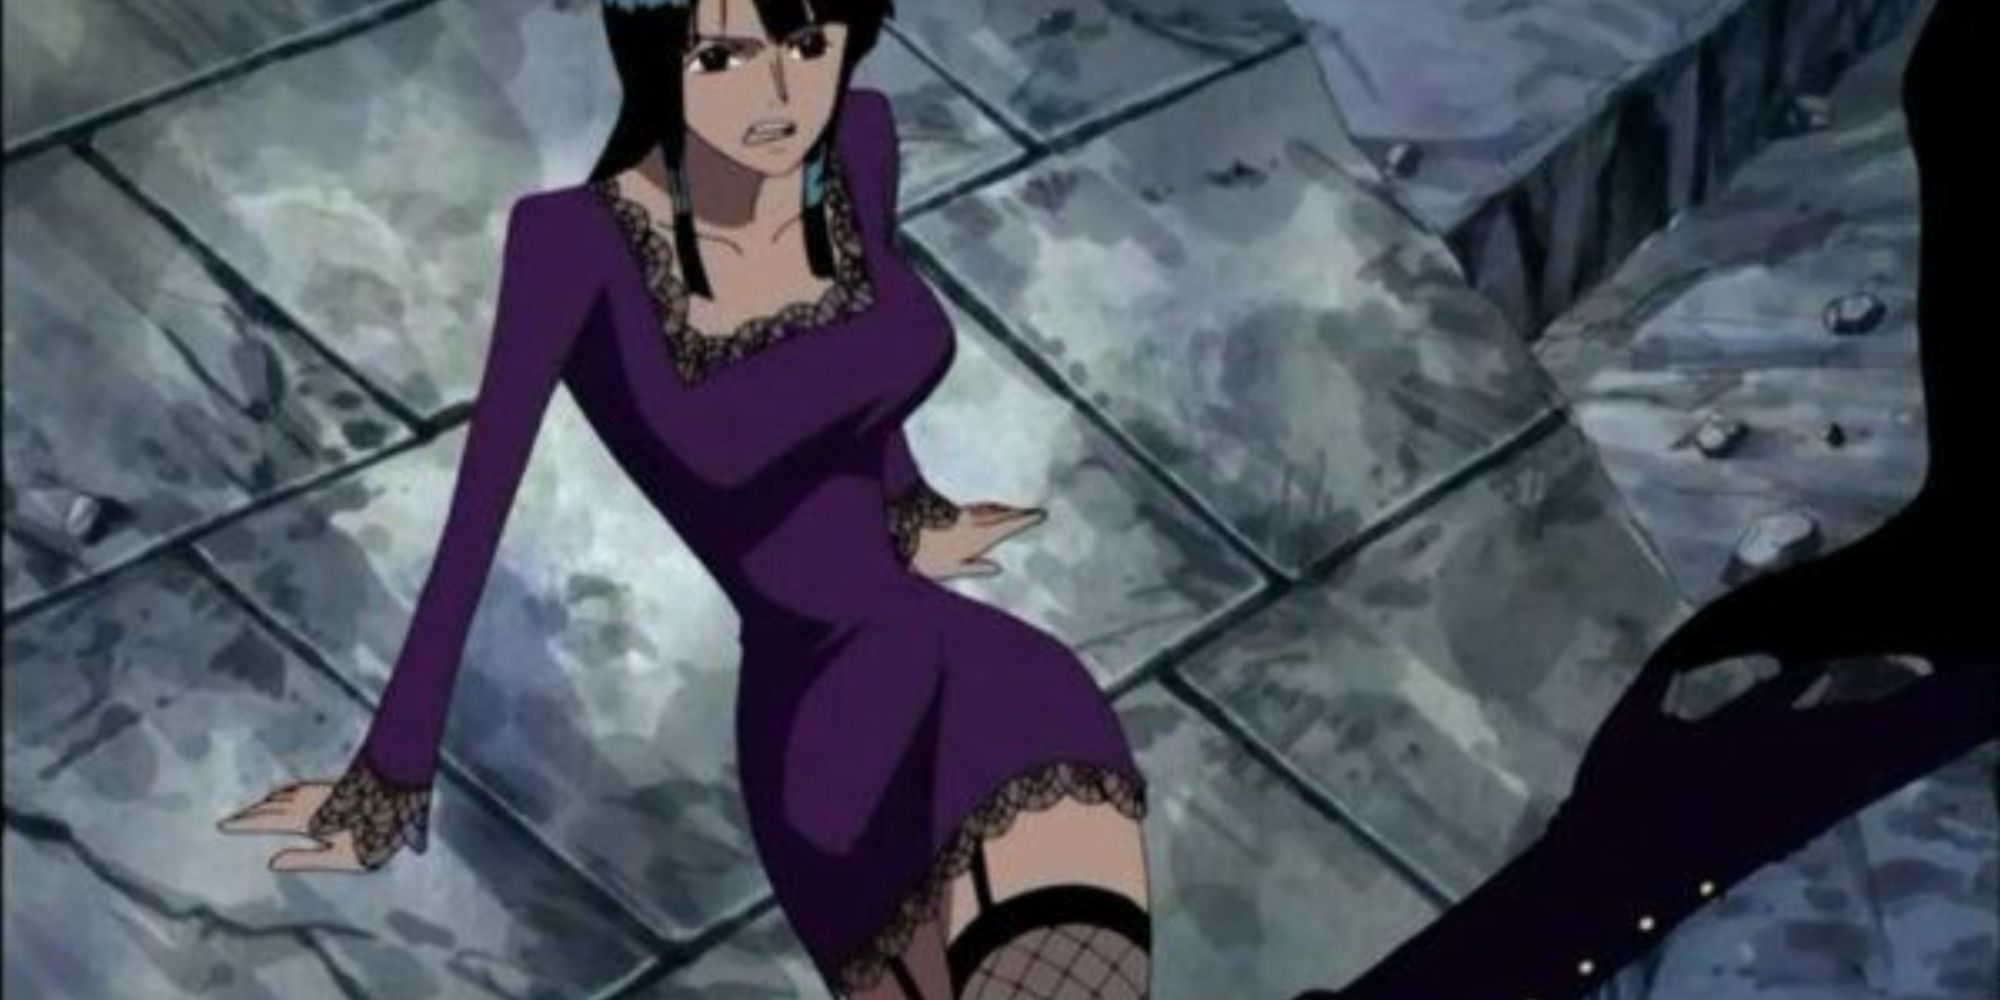 Nico Robin as she appears during One Piece's Thriller Bark arc